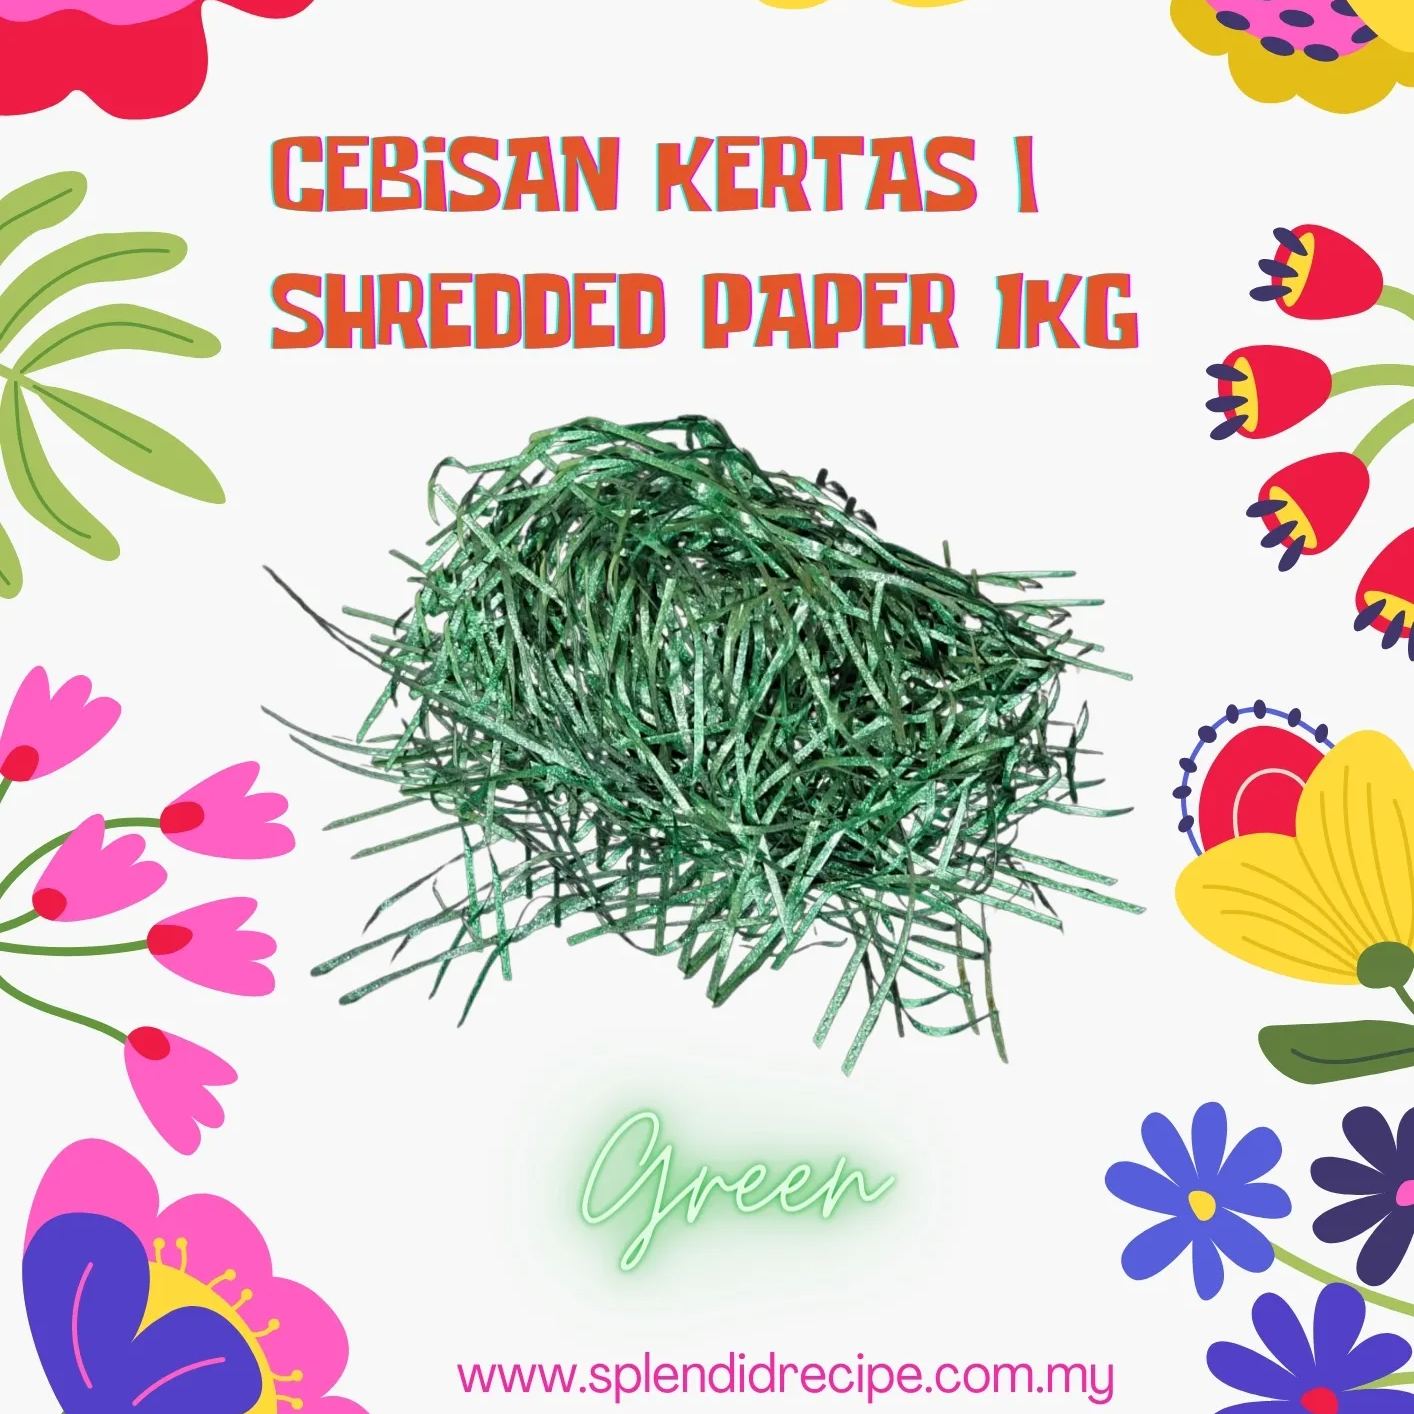 SHREDDED PAPER | PIECE OF PAPER | GREEN GLOSSY (1KG)